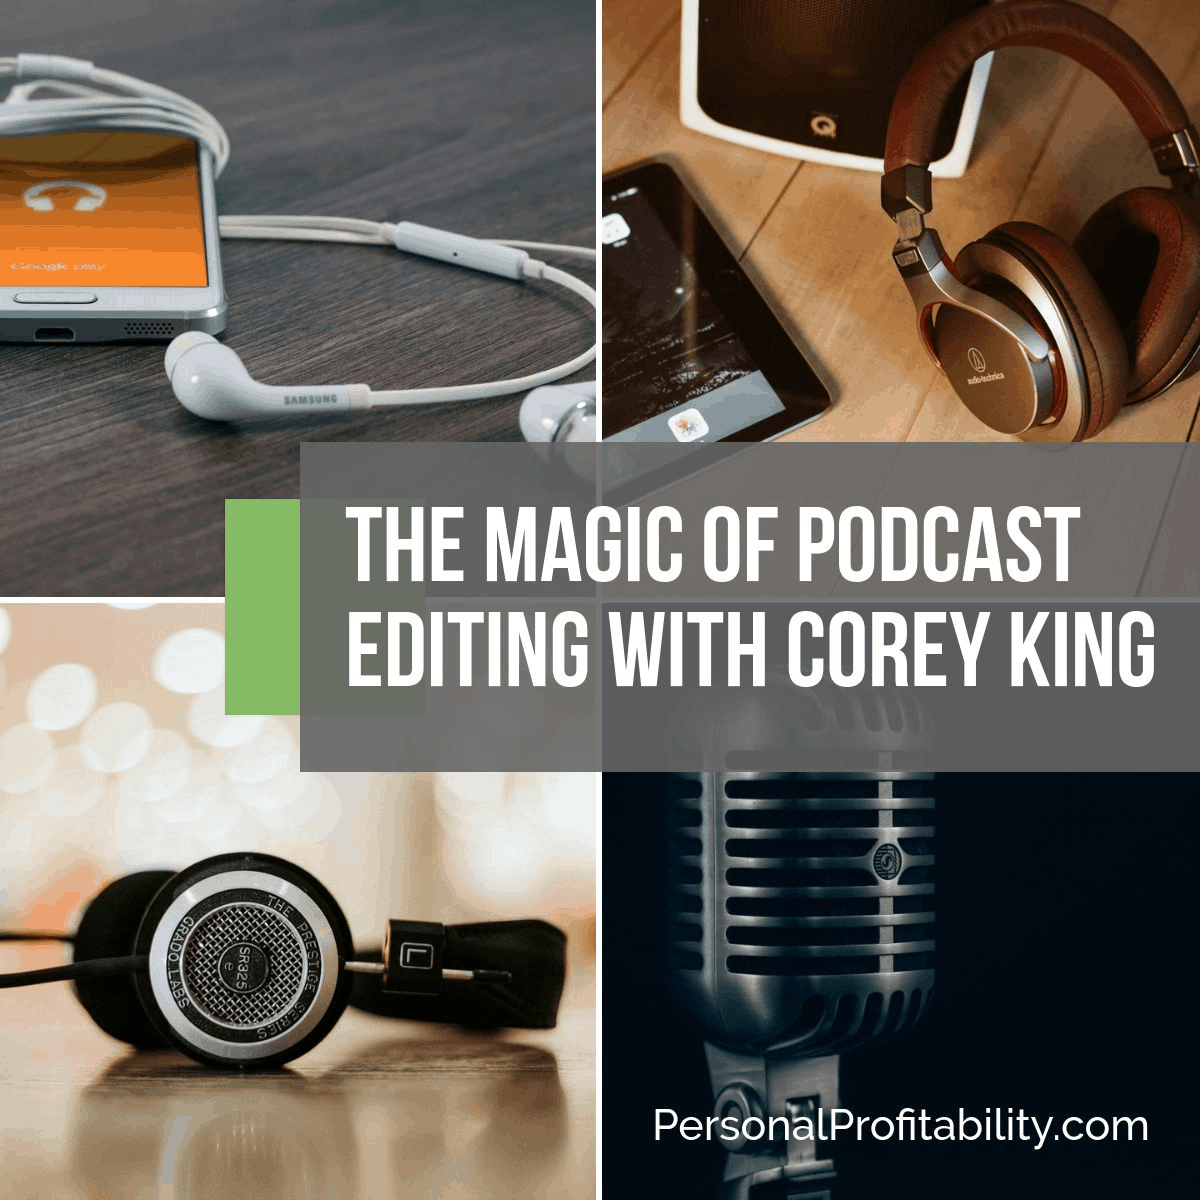 When you listen to your favorite podcast (hopefully this is one of them!), I bet you never think about all the work that goes on behind the scenes of making that podcast sound amazing and seamless. The magic of podcast editing with Corey King!